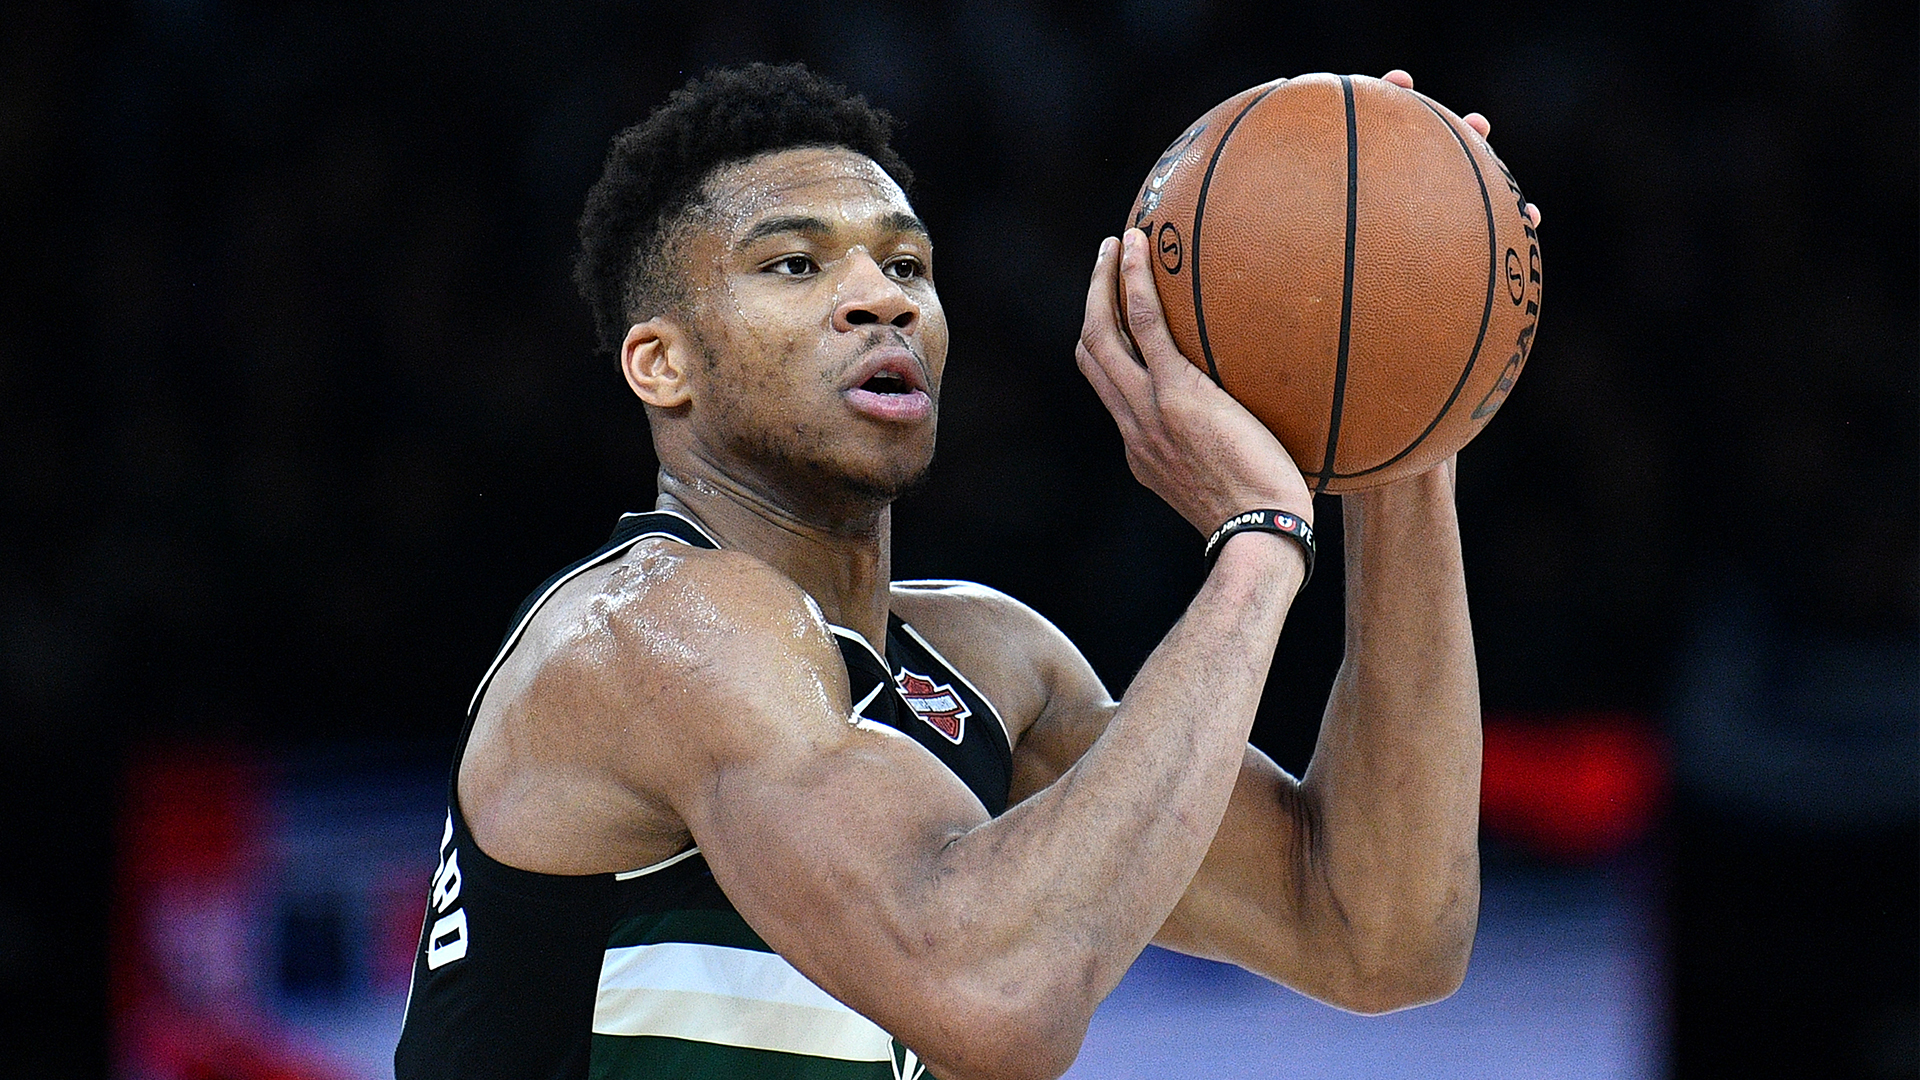 NBA Star Giannis Antetokounmpo Signs With Meta's WhatsApp For Their First-Ever Endorsement Deal